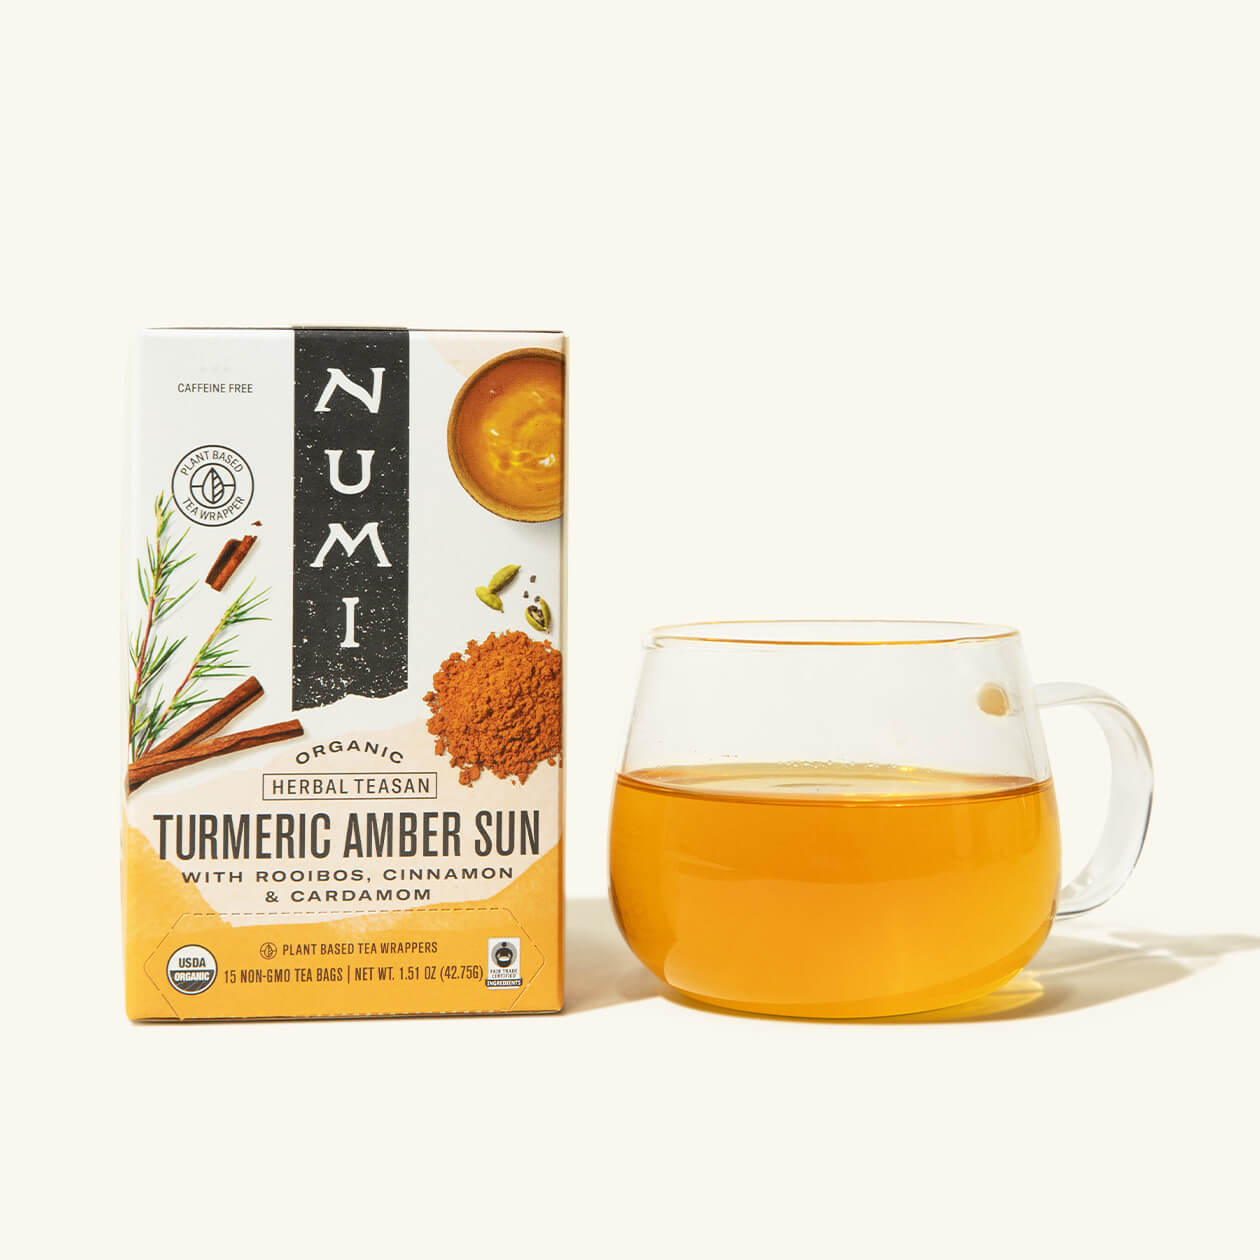 A box of Numi's Turmeric Amber Sun next to a brewed cup of tea in a clear cup